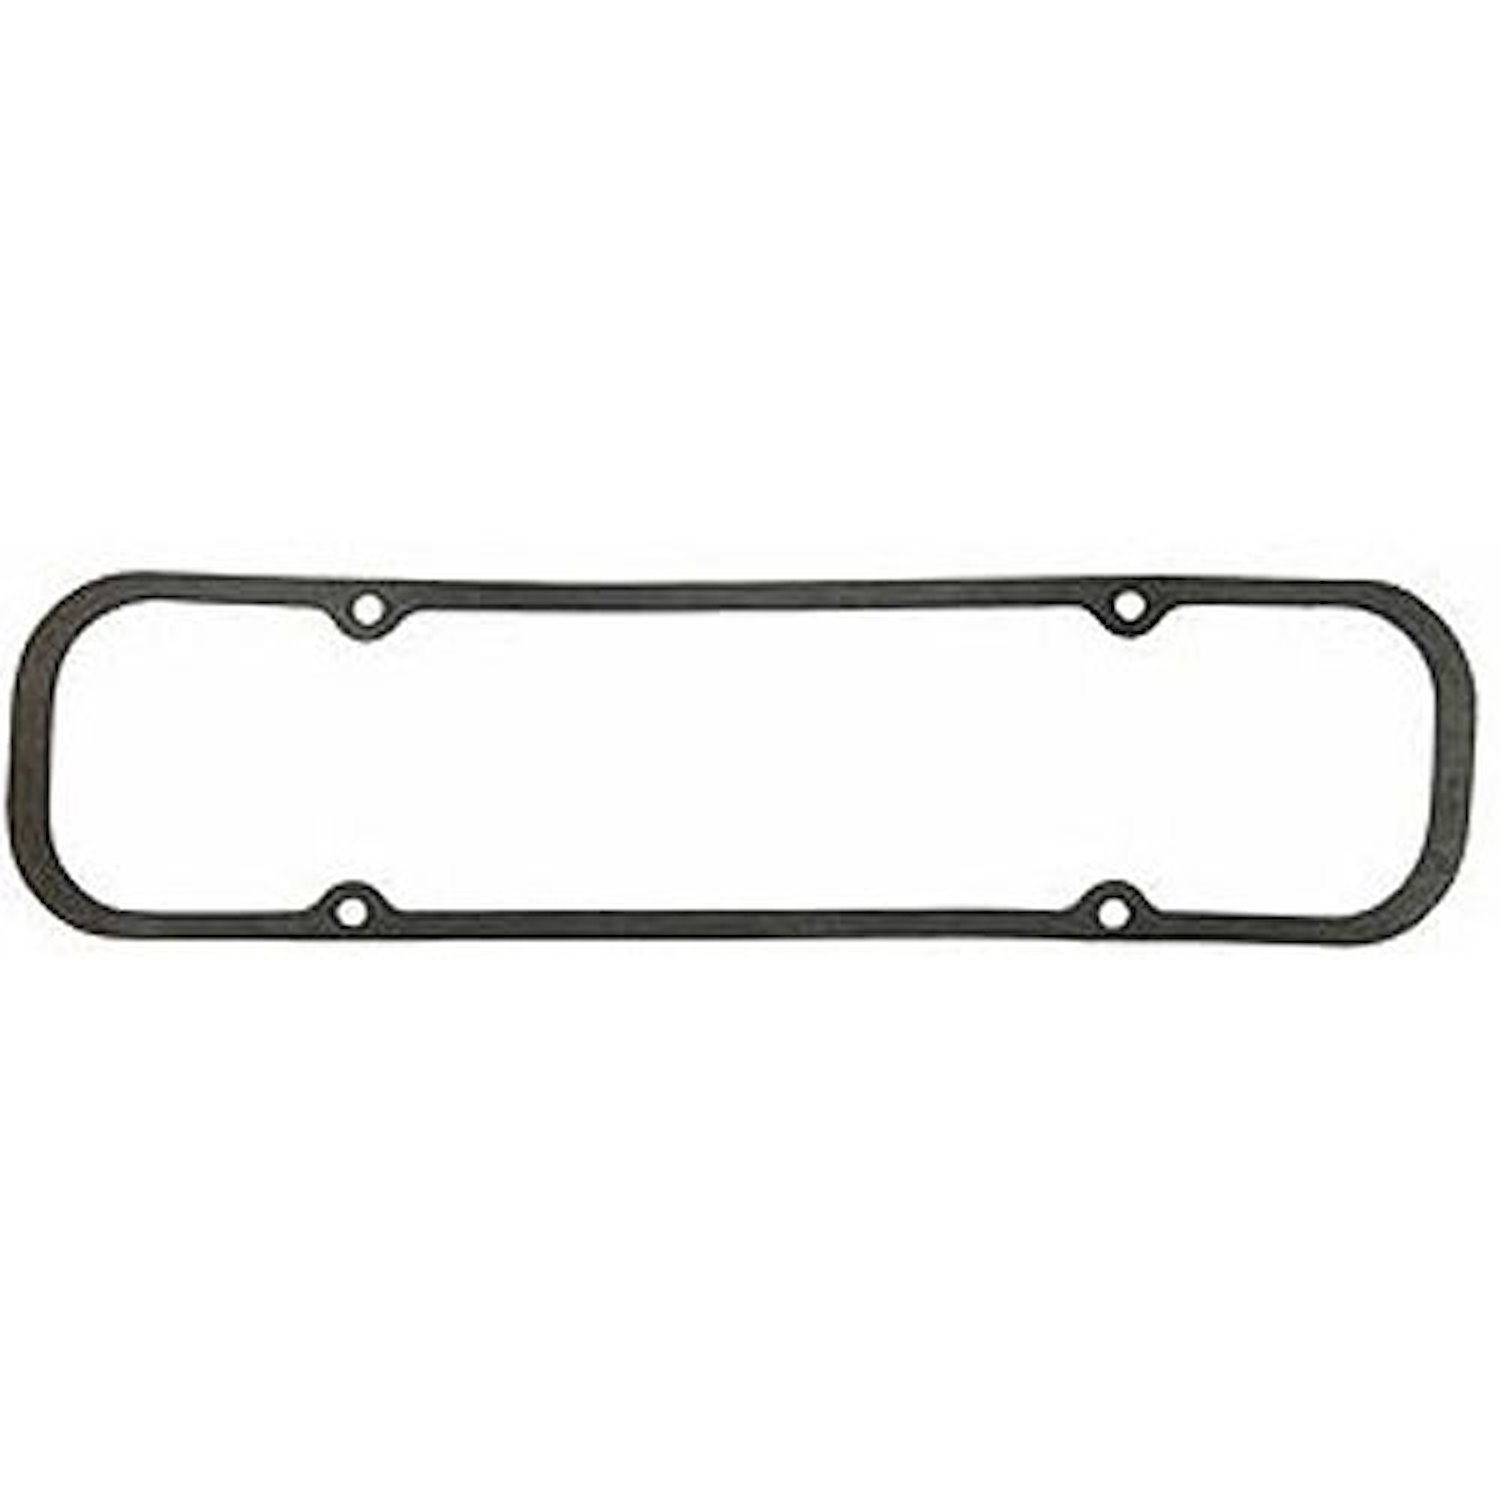 Valve Cover Gasket Chevy Small Block 18/23 Degree V8